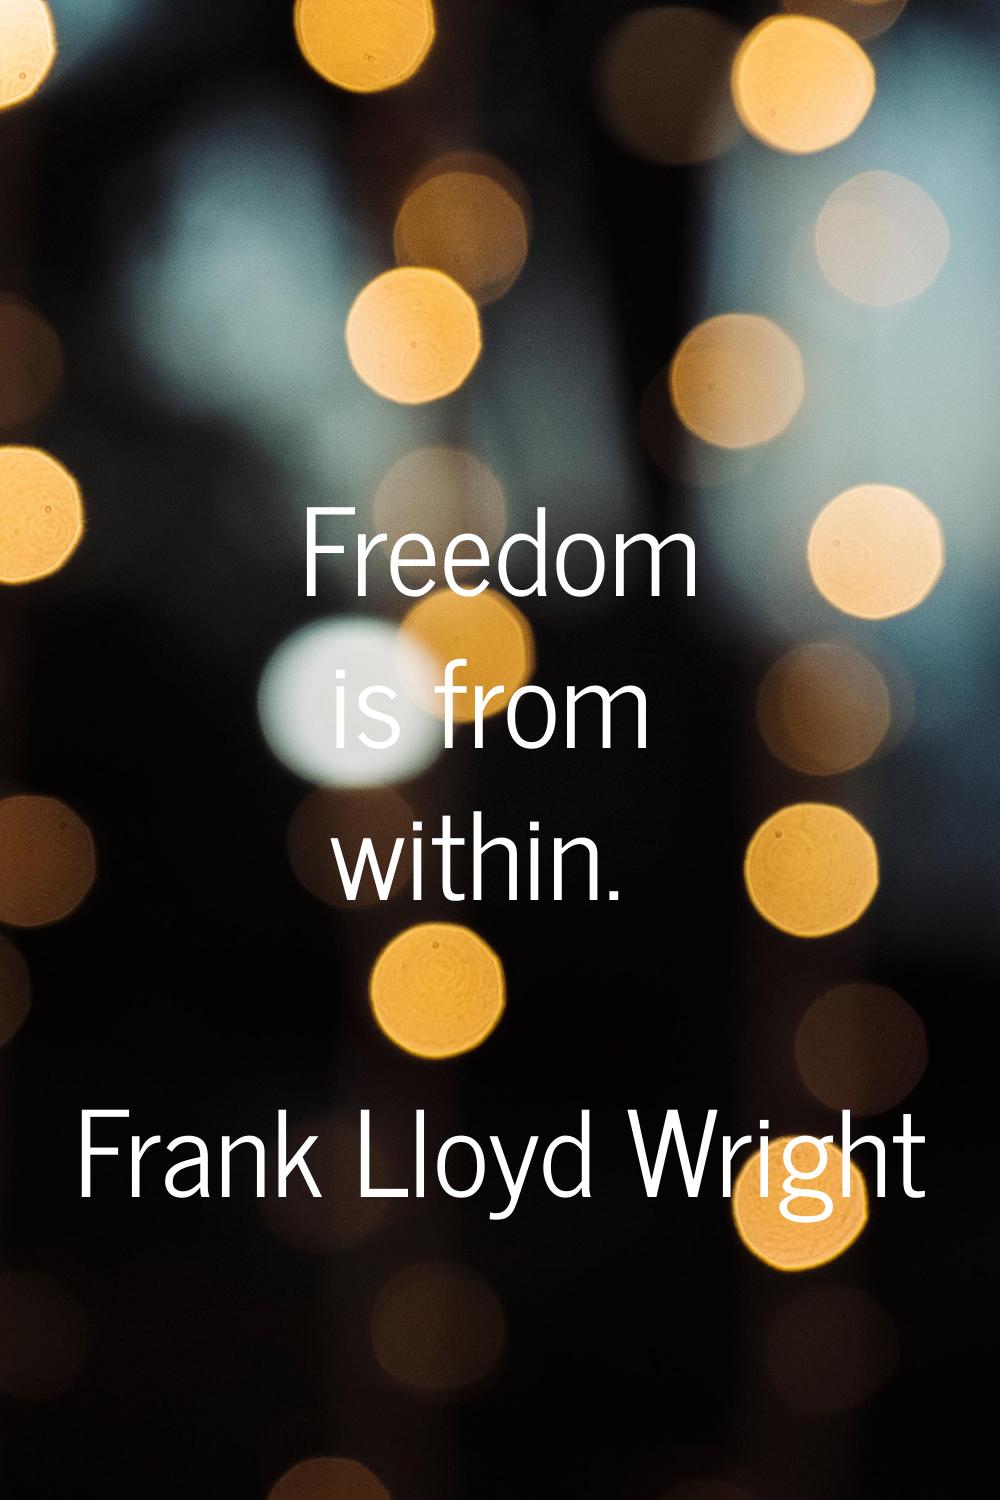 Freedom is from within.